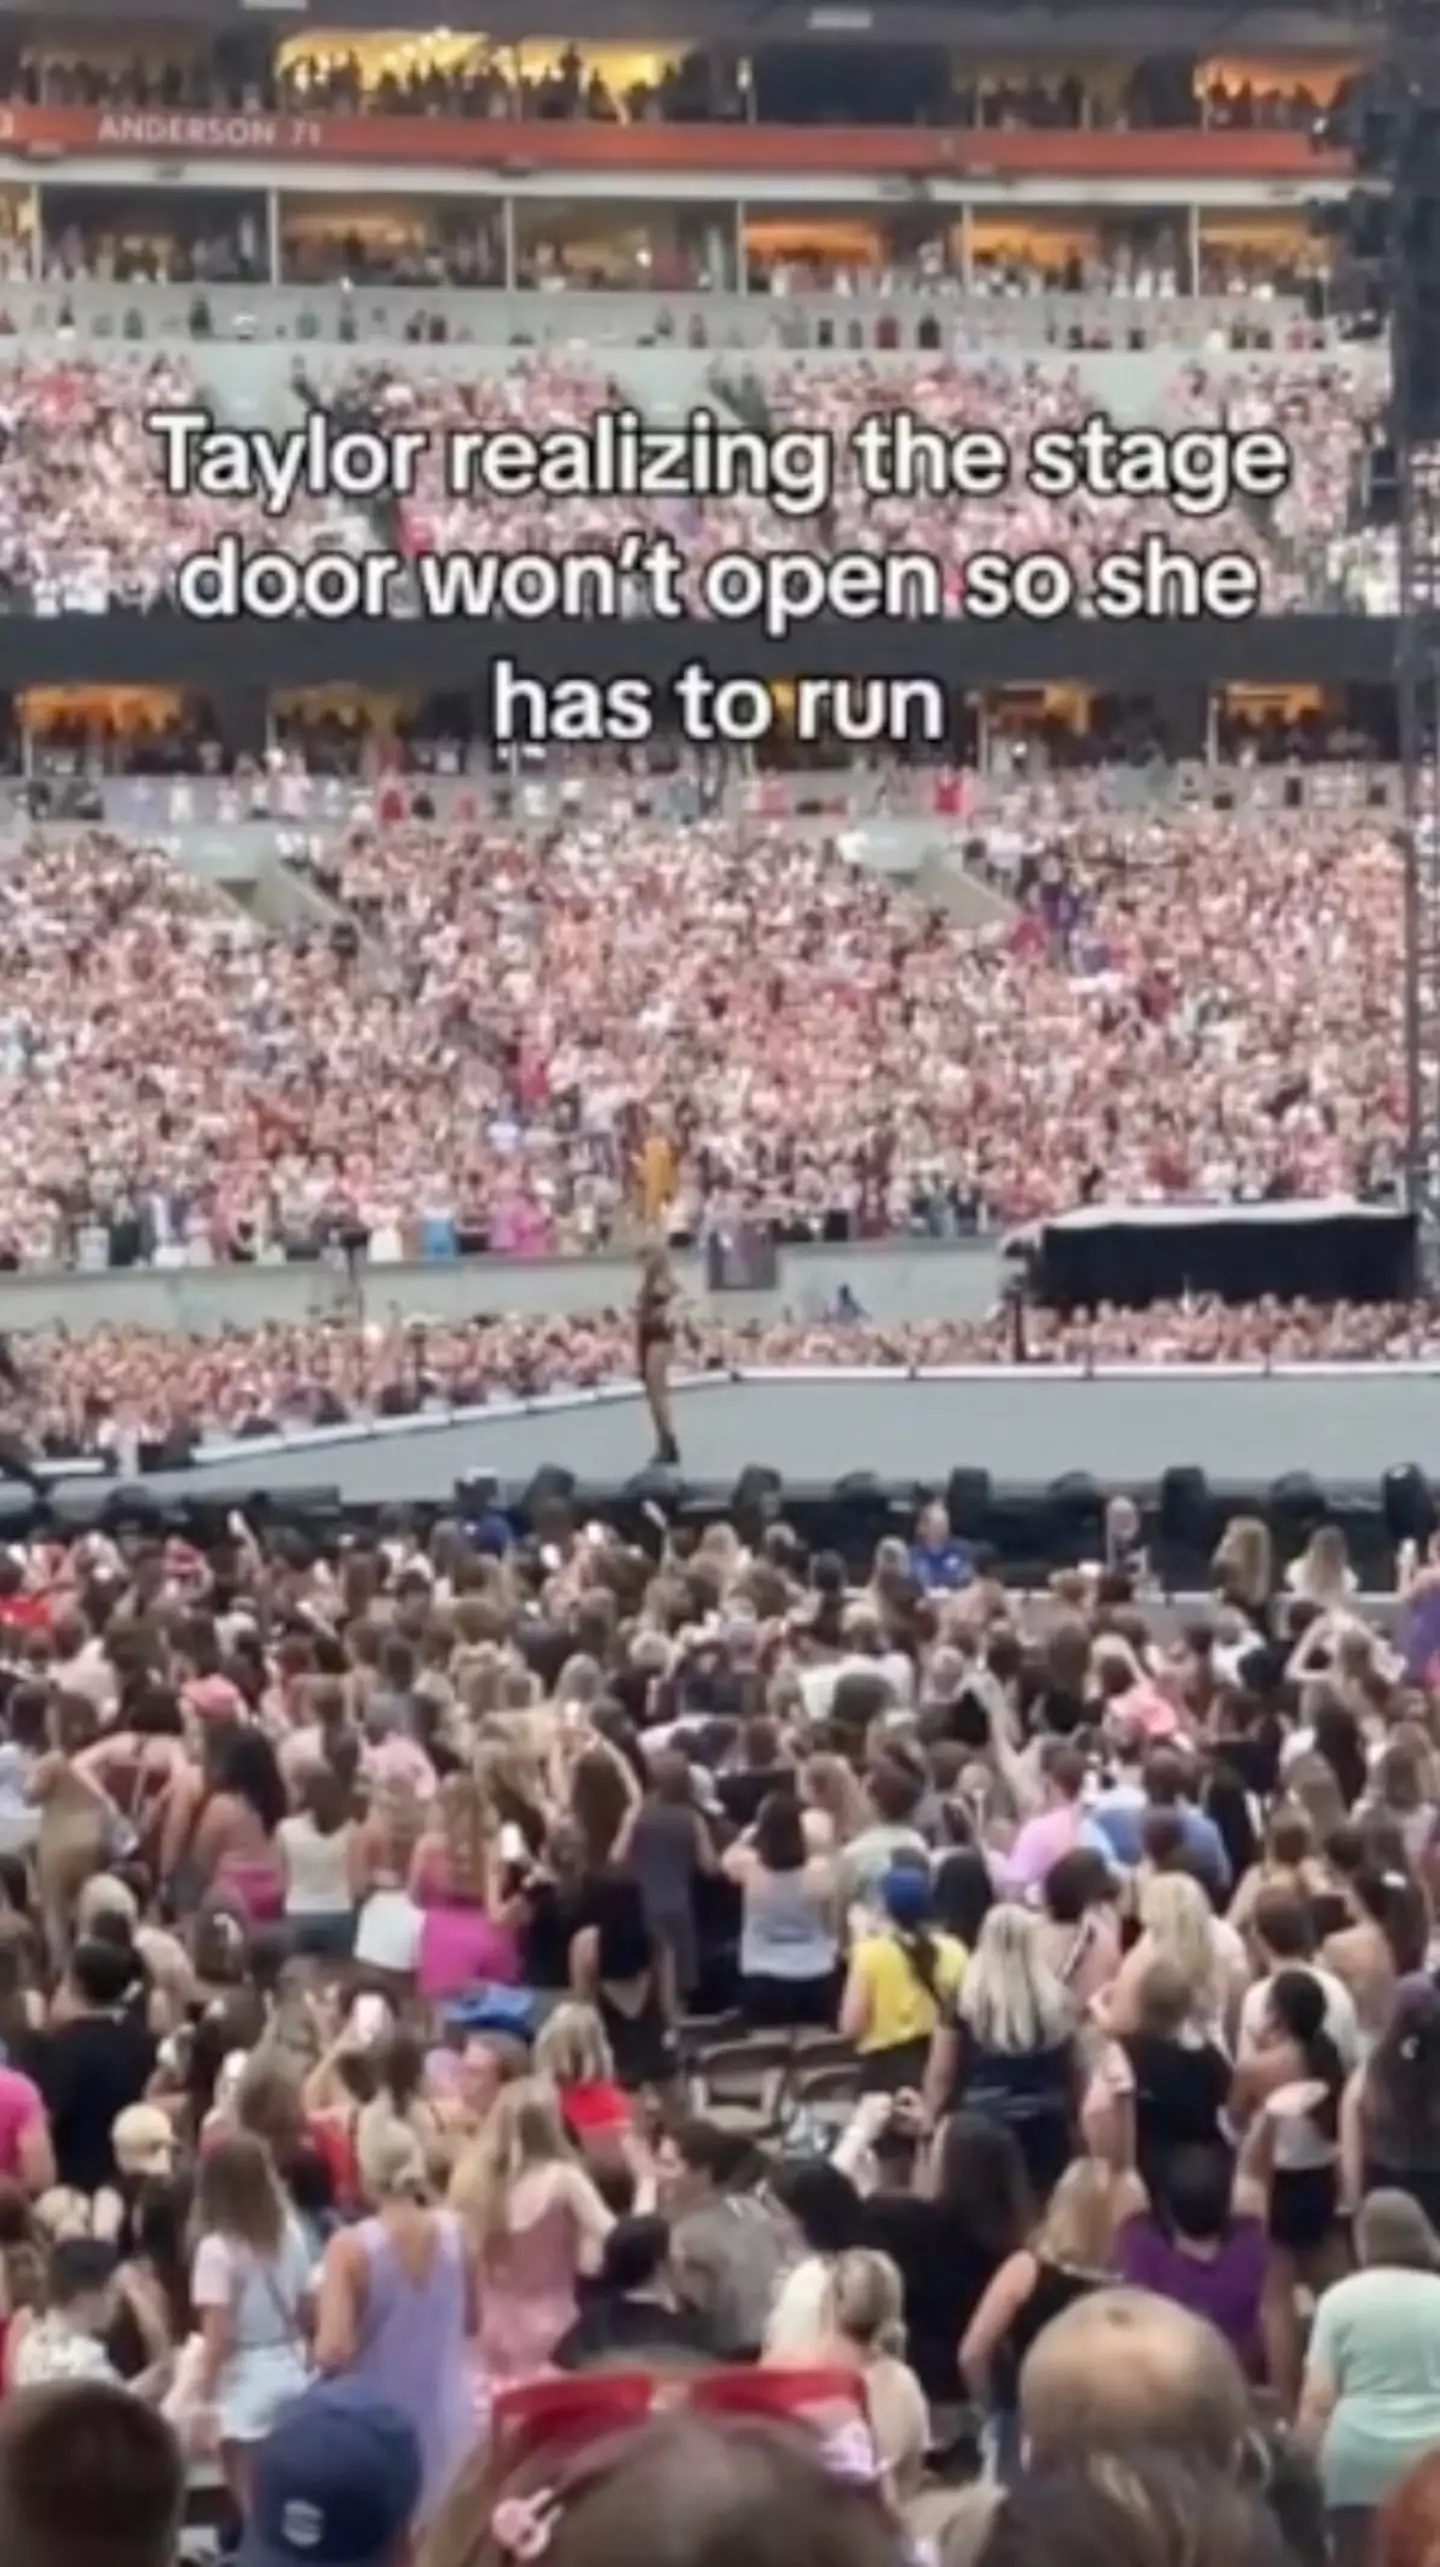 Taylor Swift fans witnessed the singer awkwardly sprint off stage after a panel in the floor refused to open.